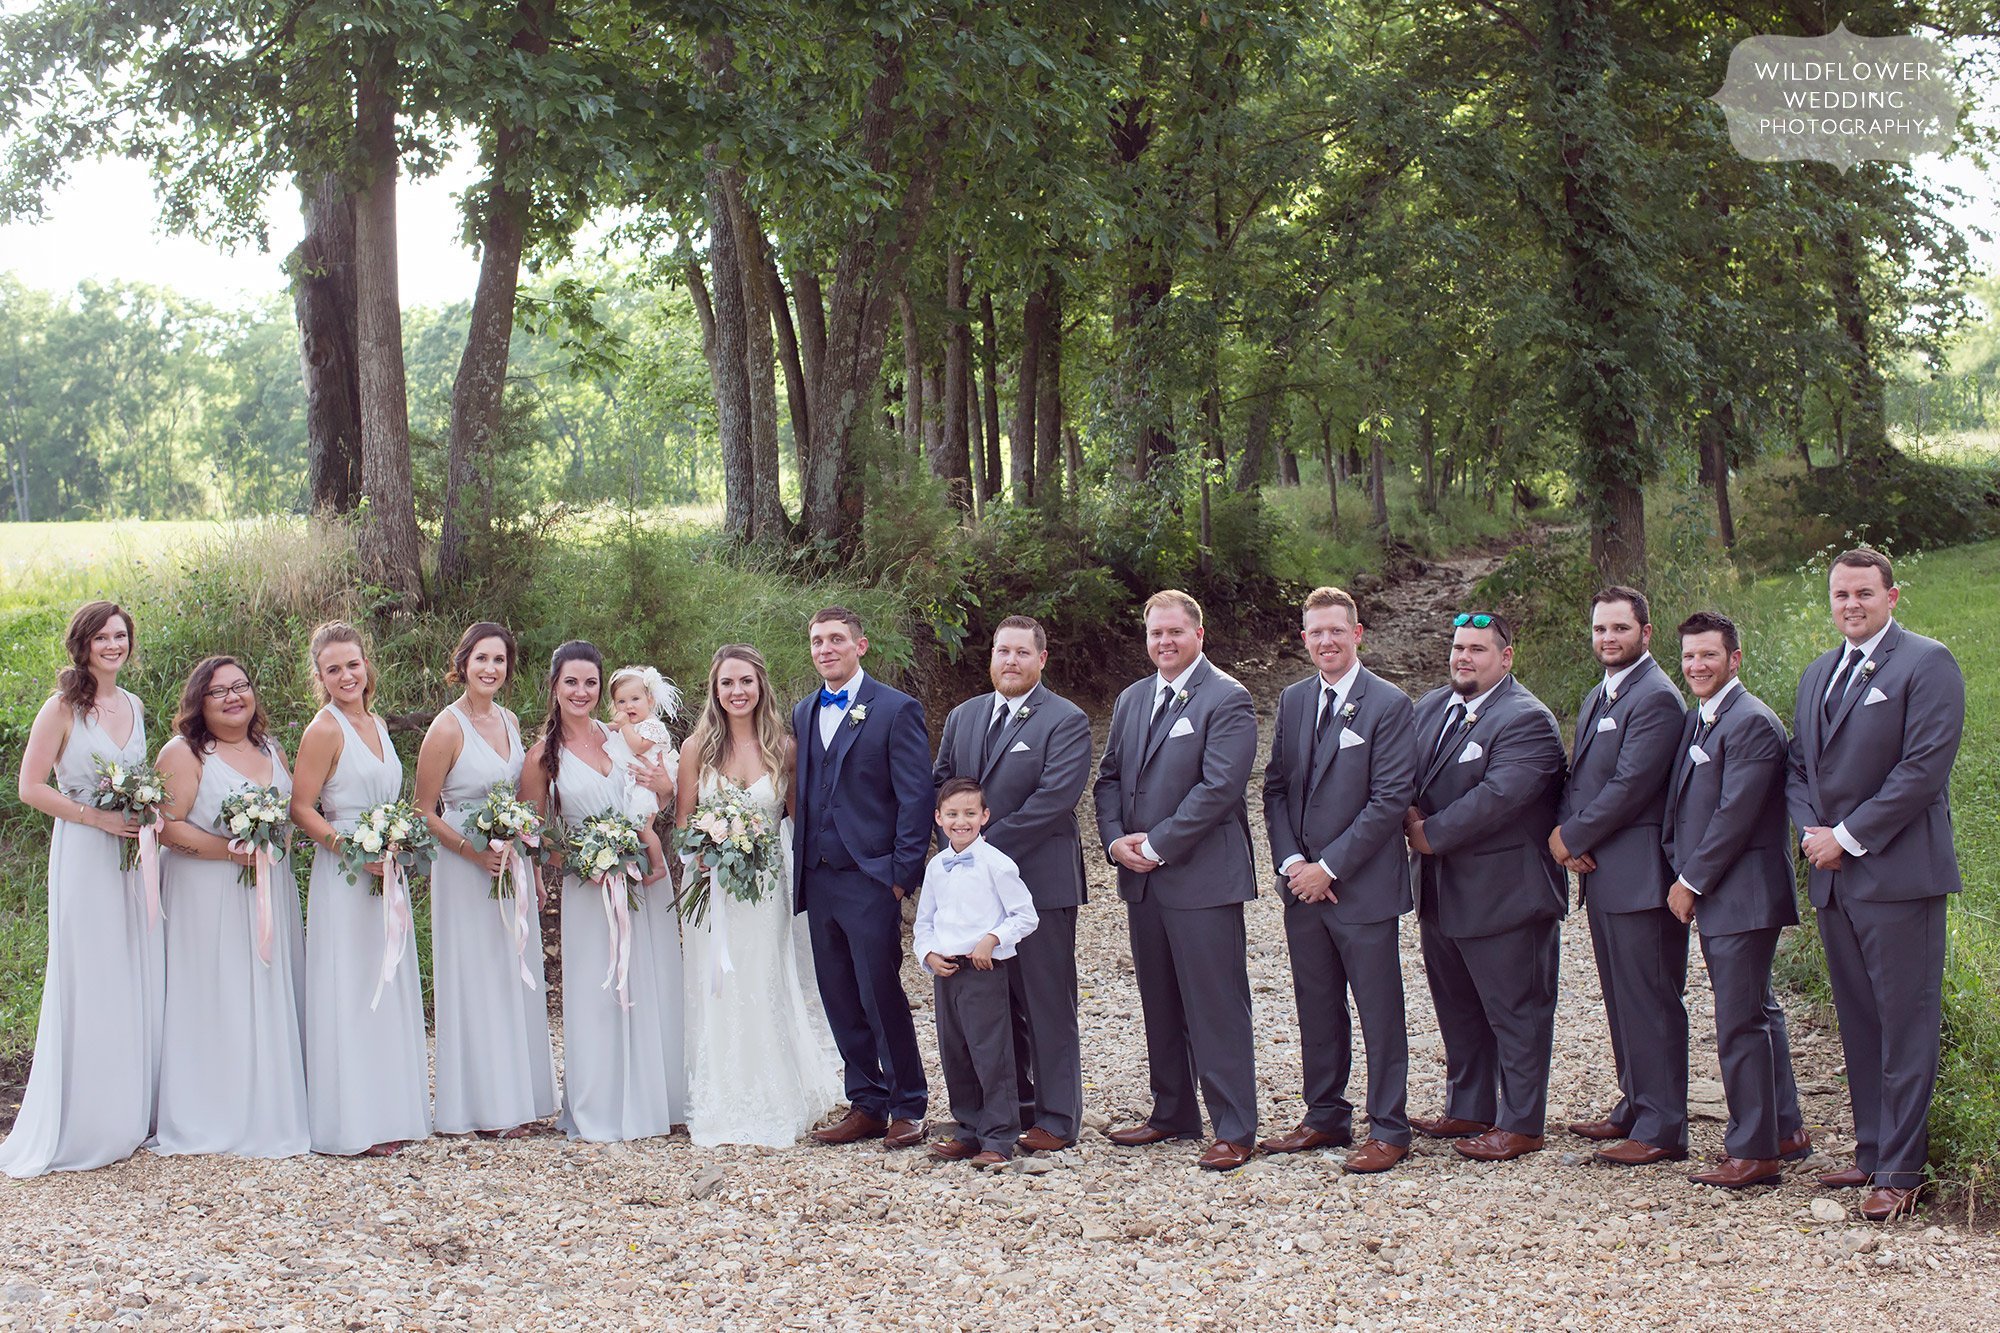 Wedding party poses in the rocky creekbed at this rustic barn wedding venue in Westphalia.